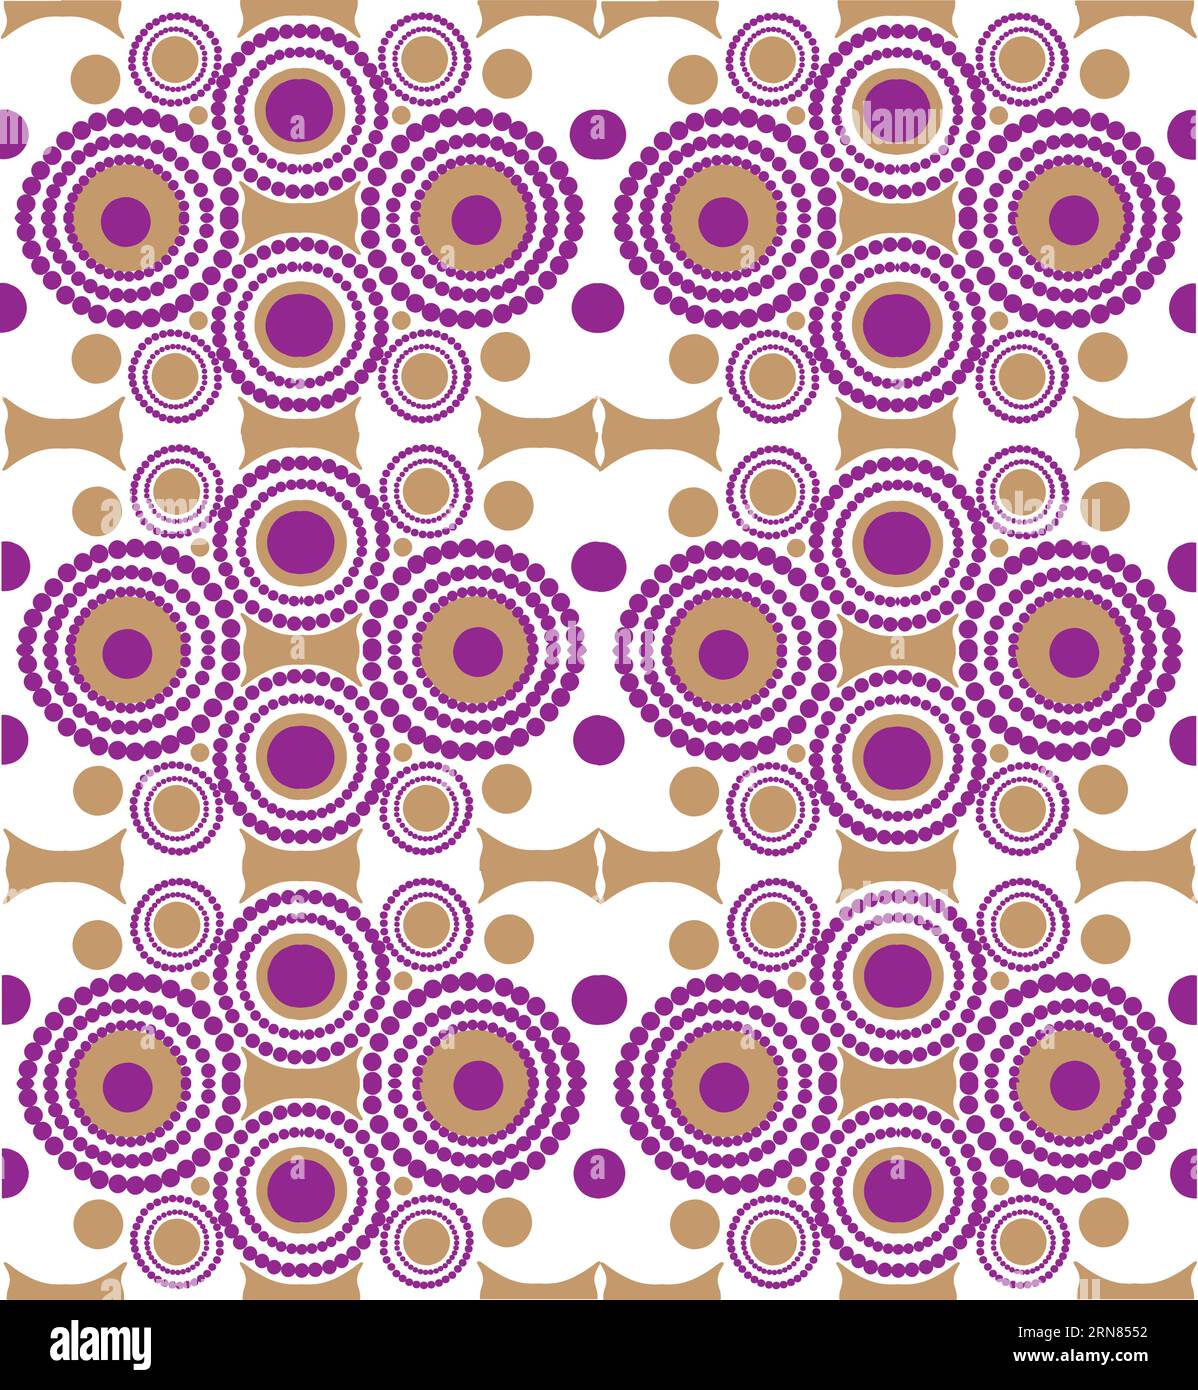 Abstract background with purple and brown dots and circles, retro, 1960s inspired Stock Vector